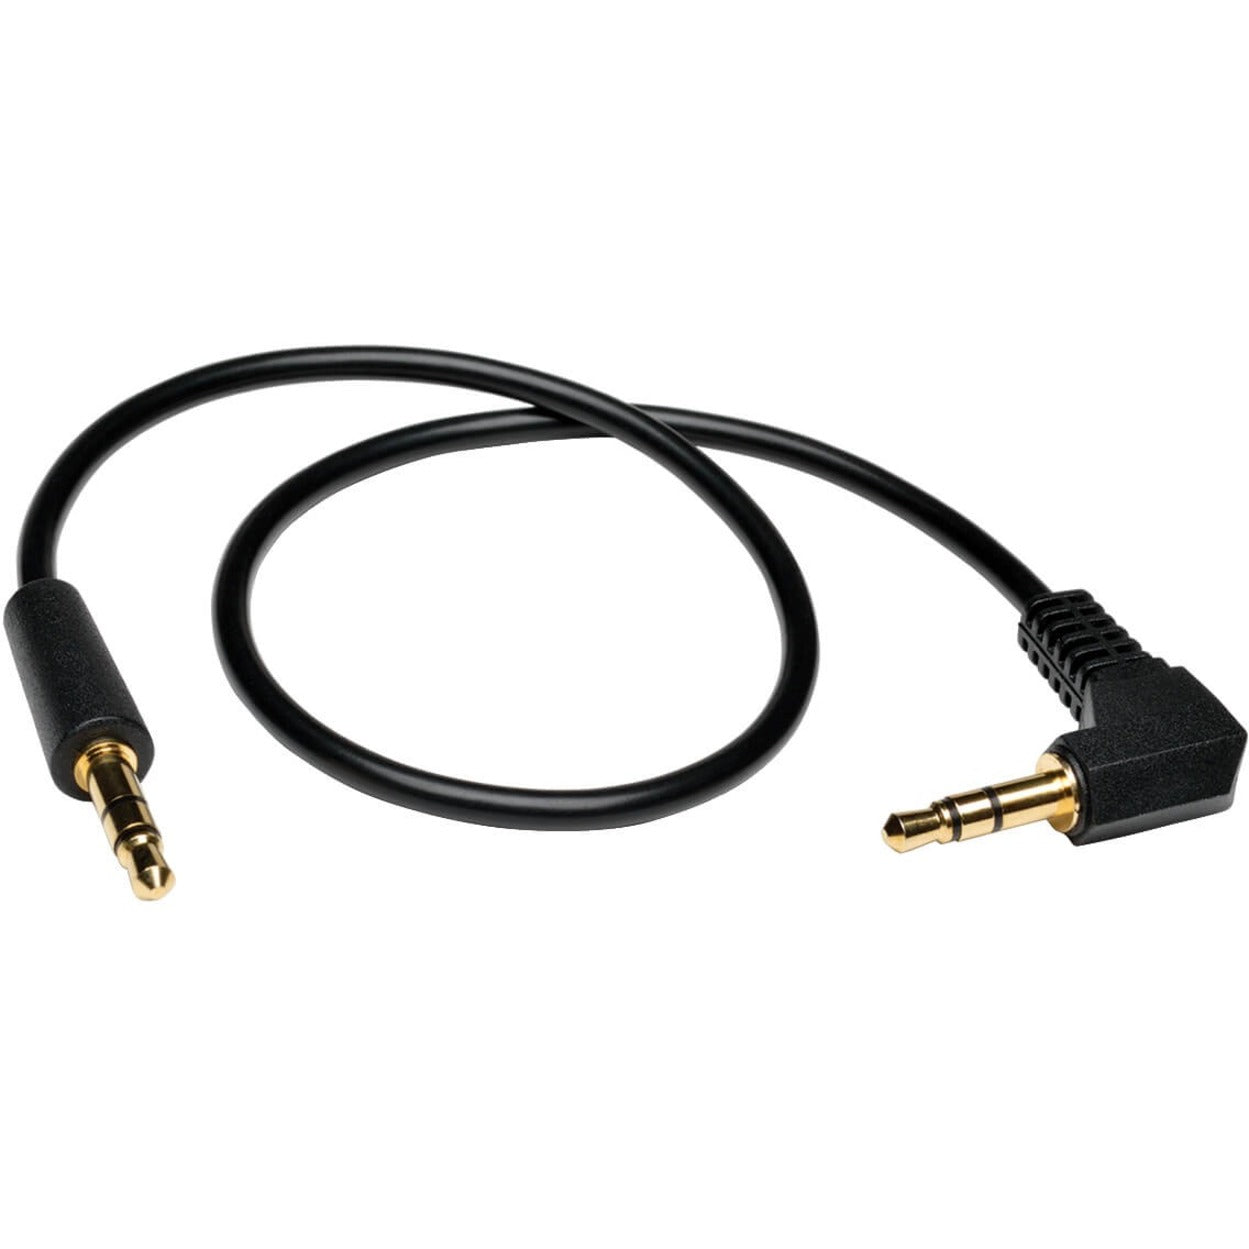 Tripp Lite P312-001-RA 3.5mm Mini Stereo Audio Cable with Right Angle Plug, 1-ft.